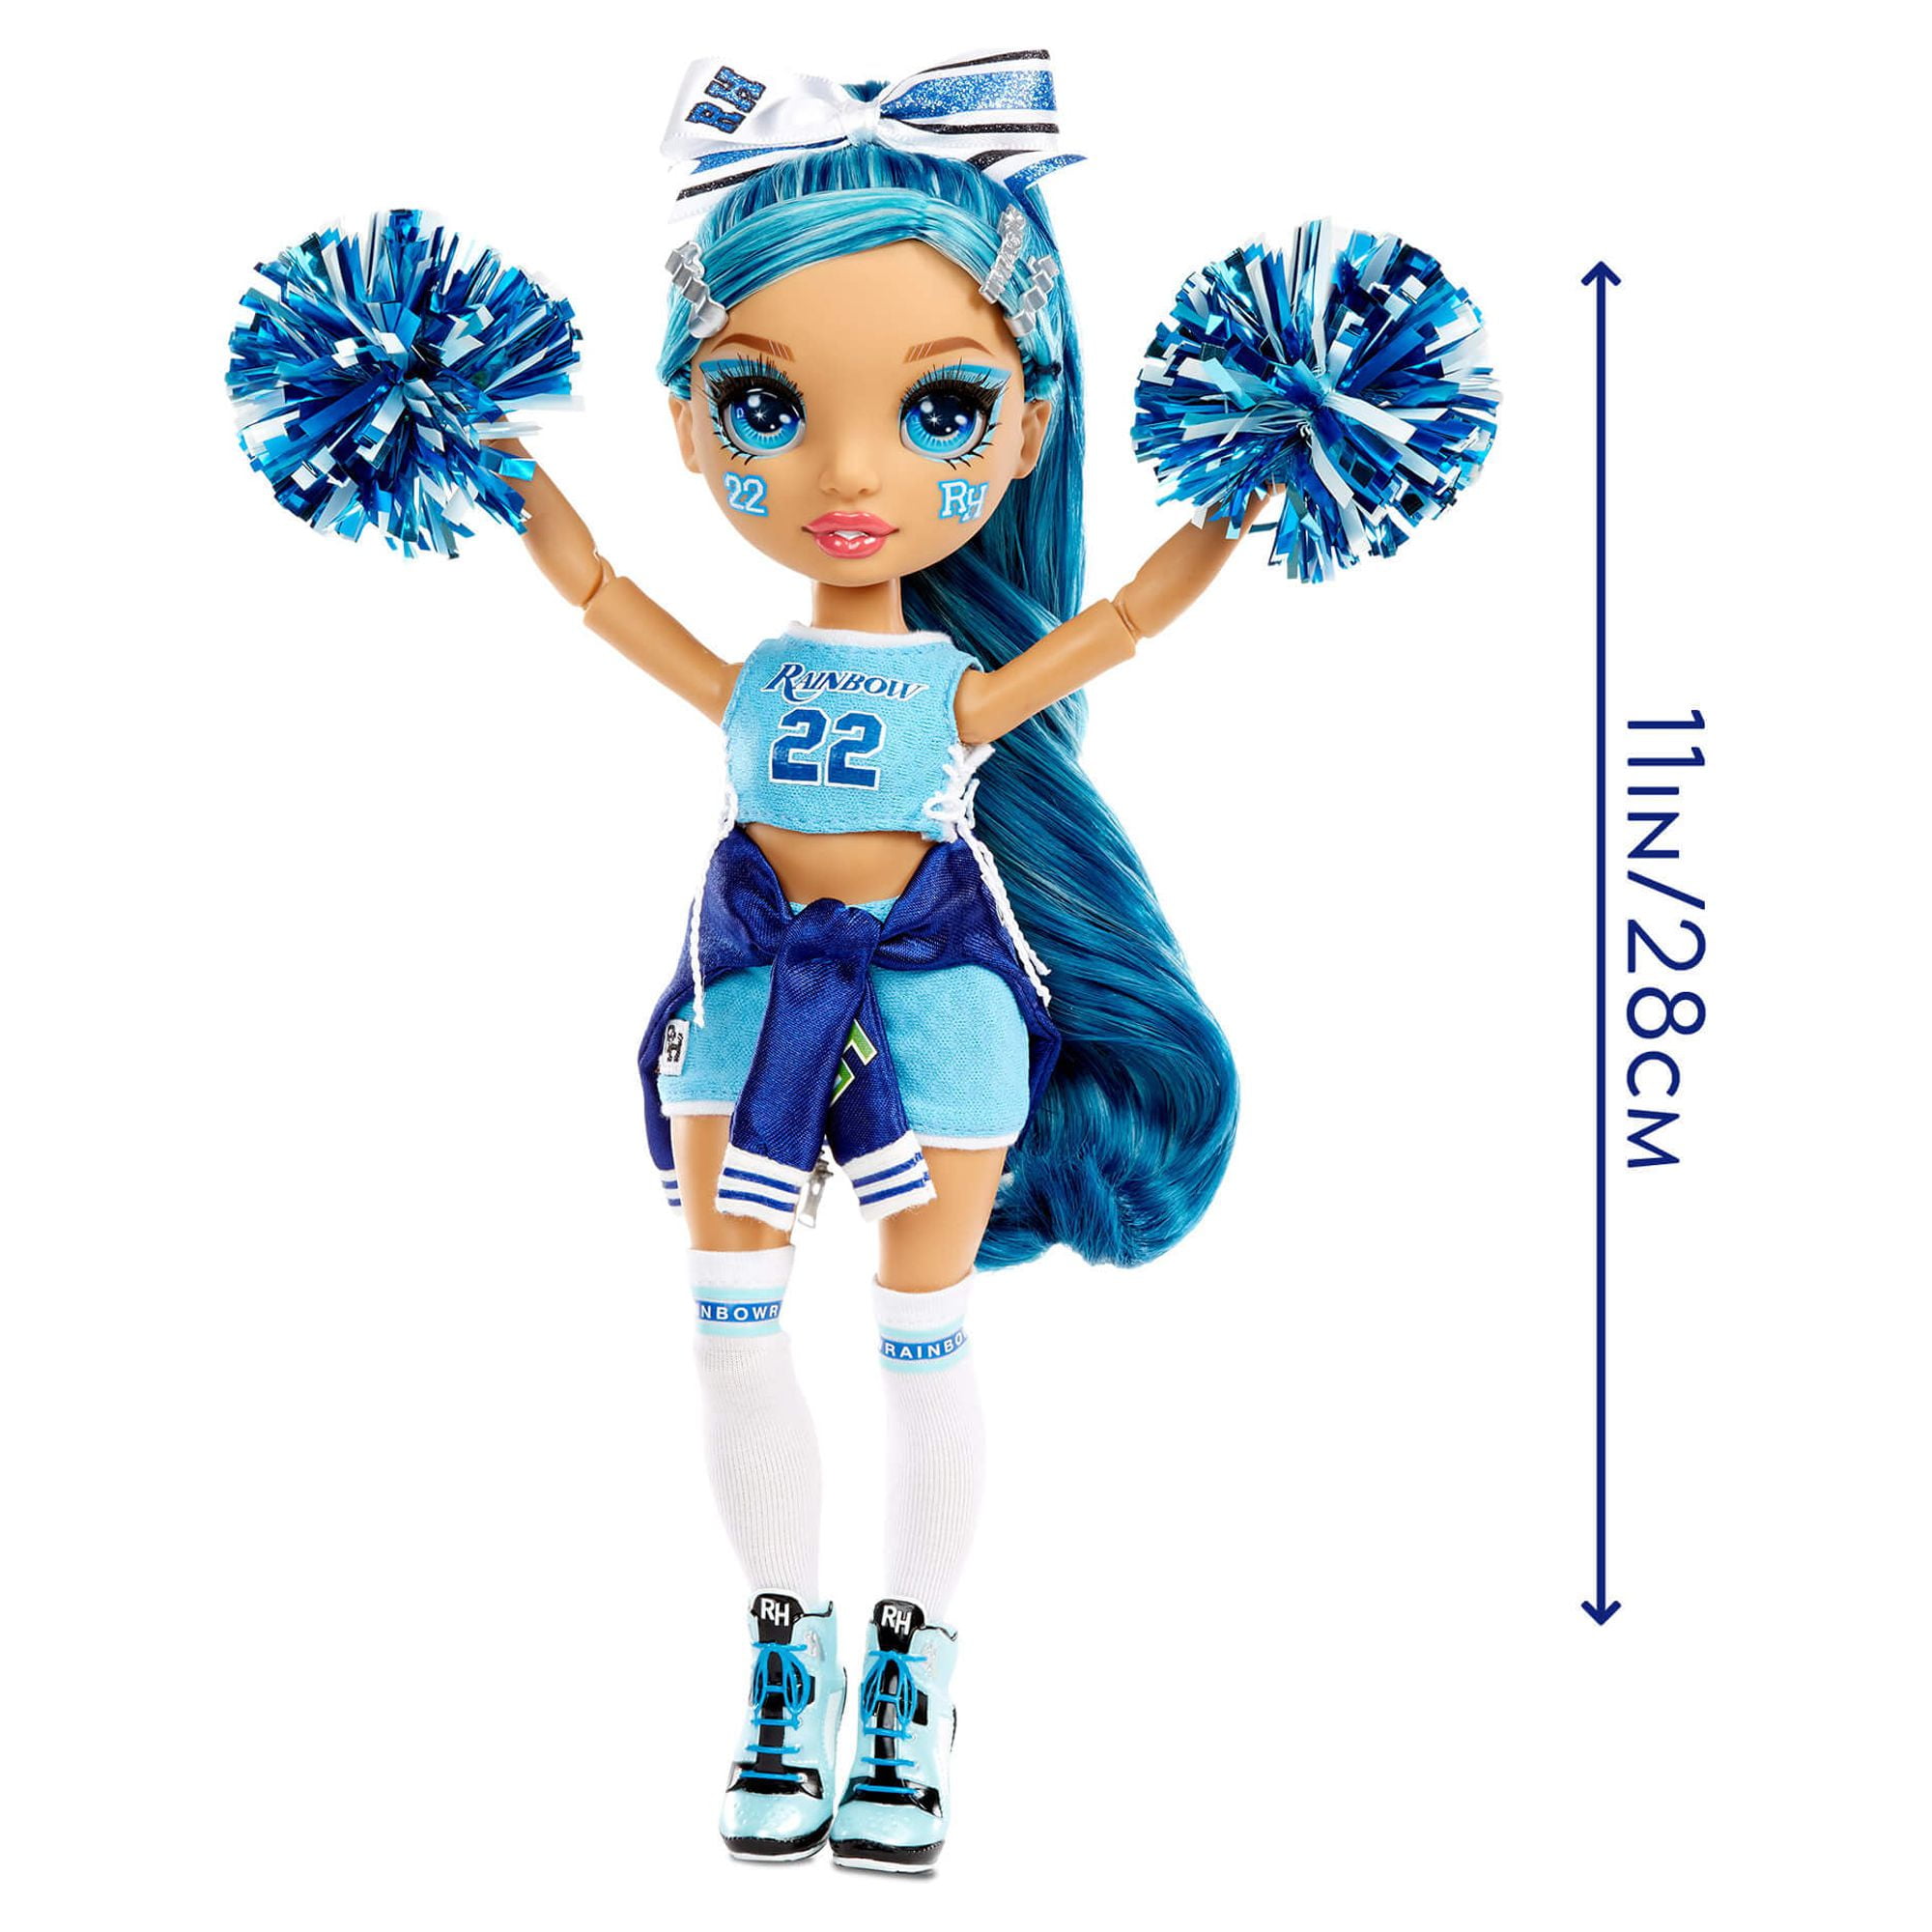 Rainbow High Cheer Skyler Bradshaw – Blue Fashion Doll with Pom Poms,  Cheerleader Doll, Toys for Kids 6-12 Years Old 